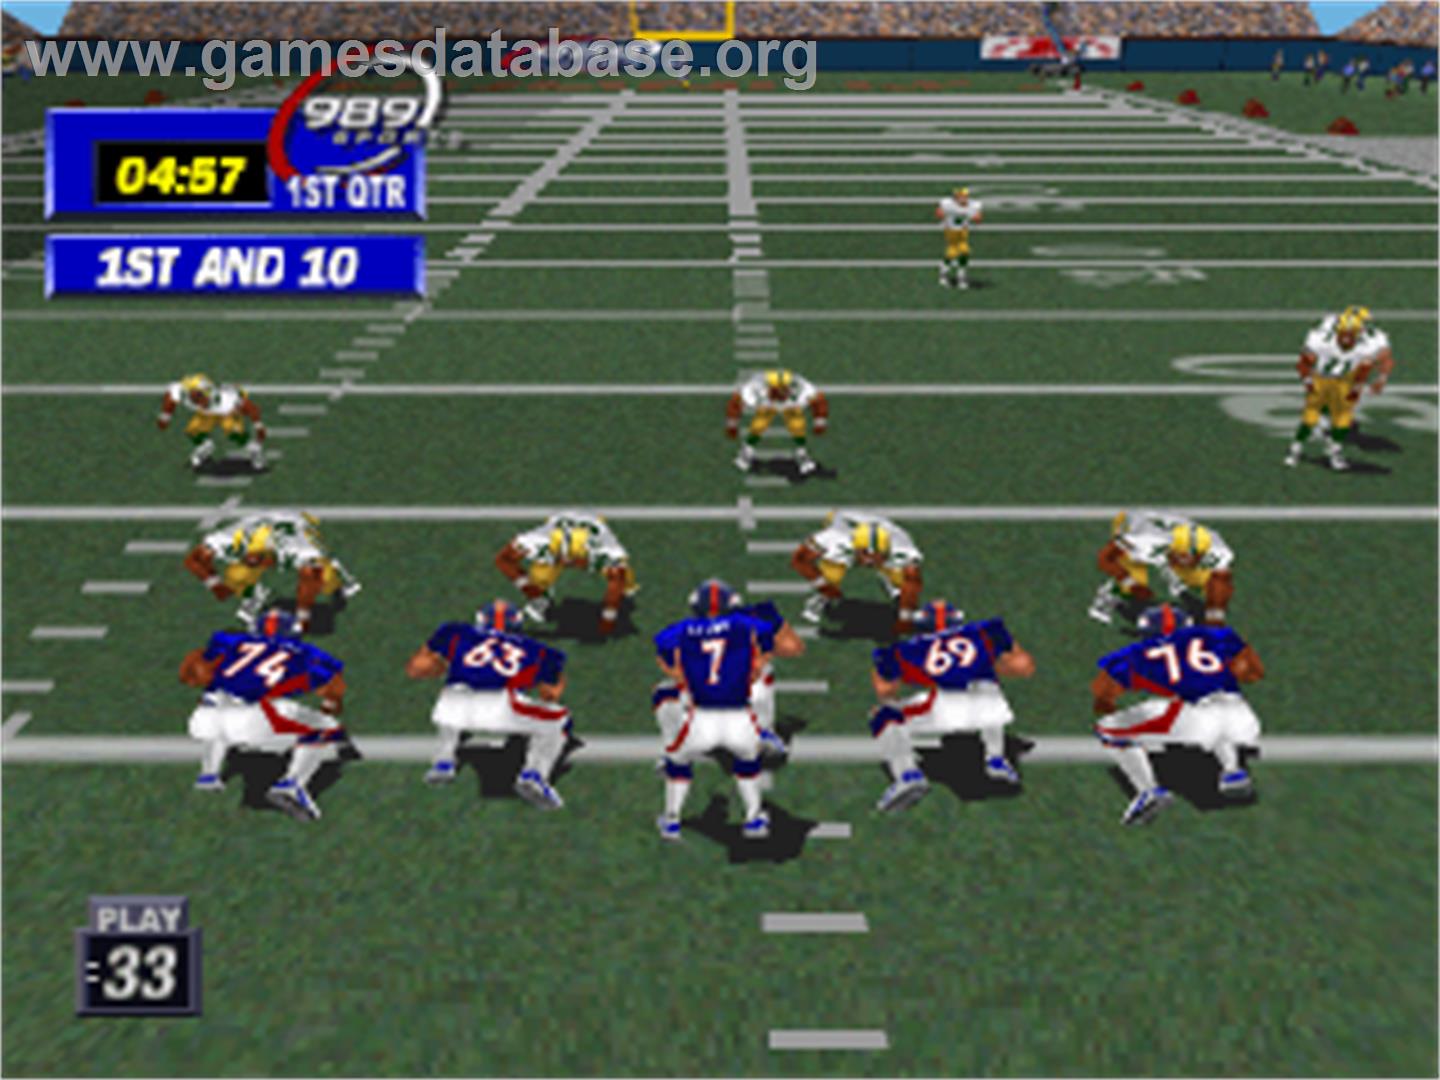 NFL GameDay '99 - Sony Playstation - Artwork - In Game